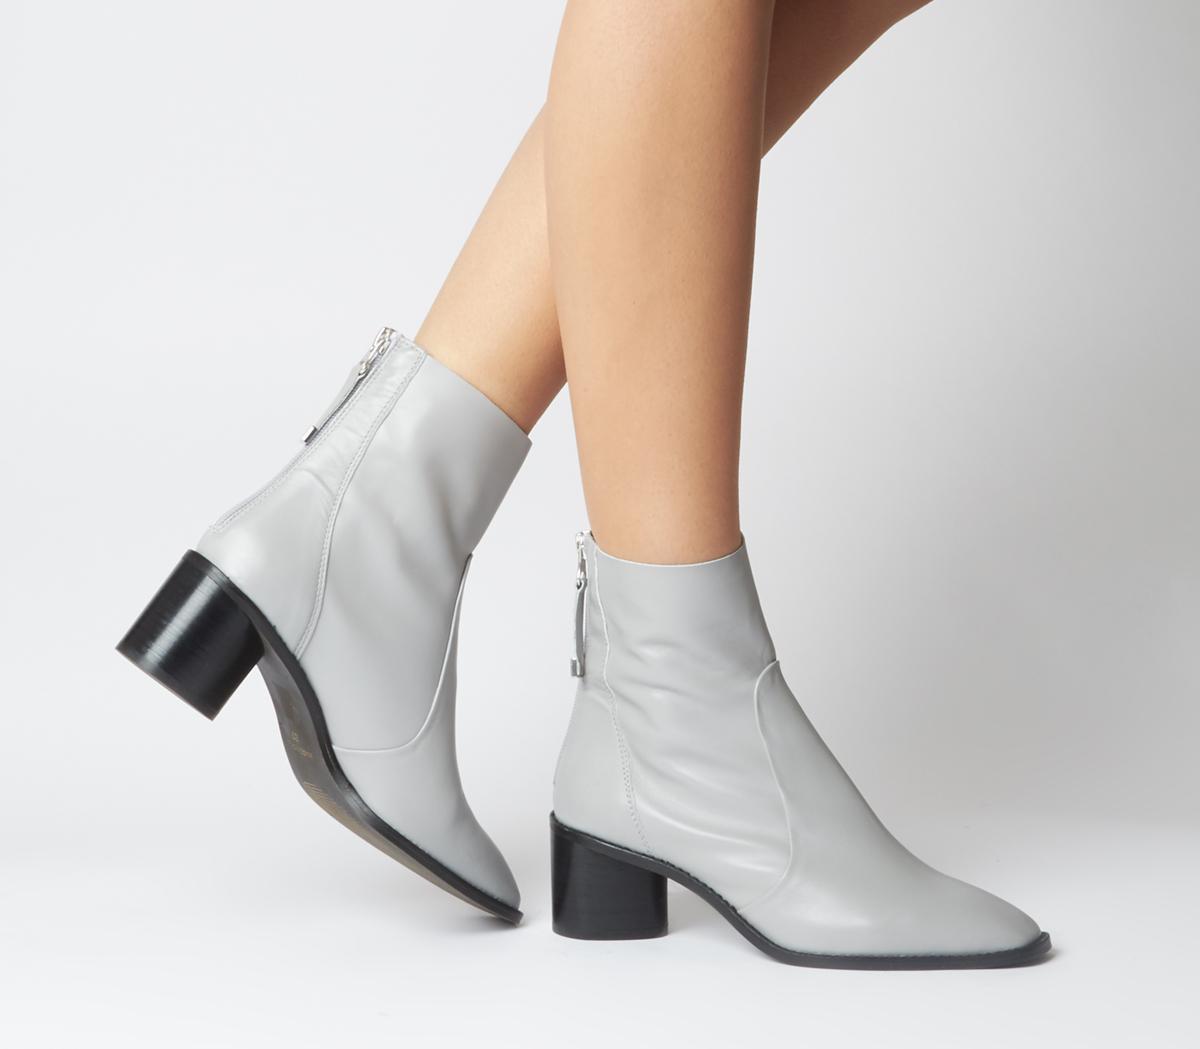 grey leather ankle boots